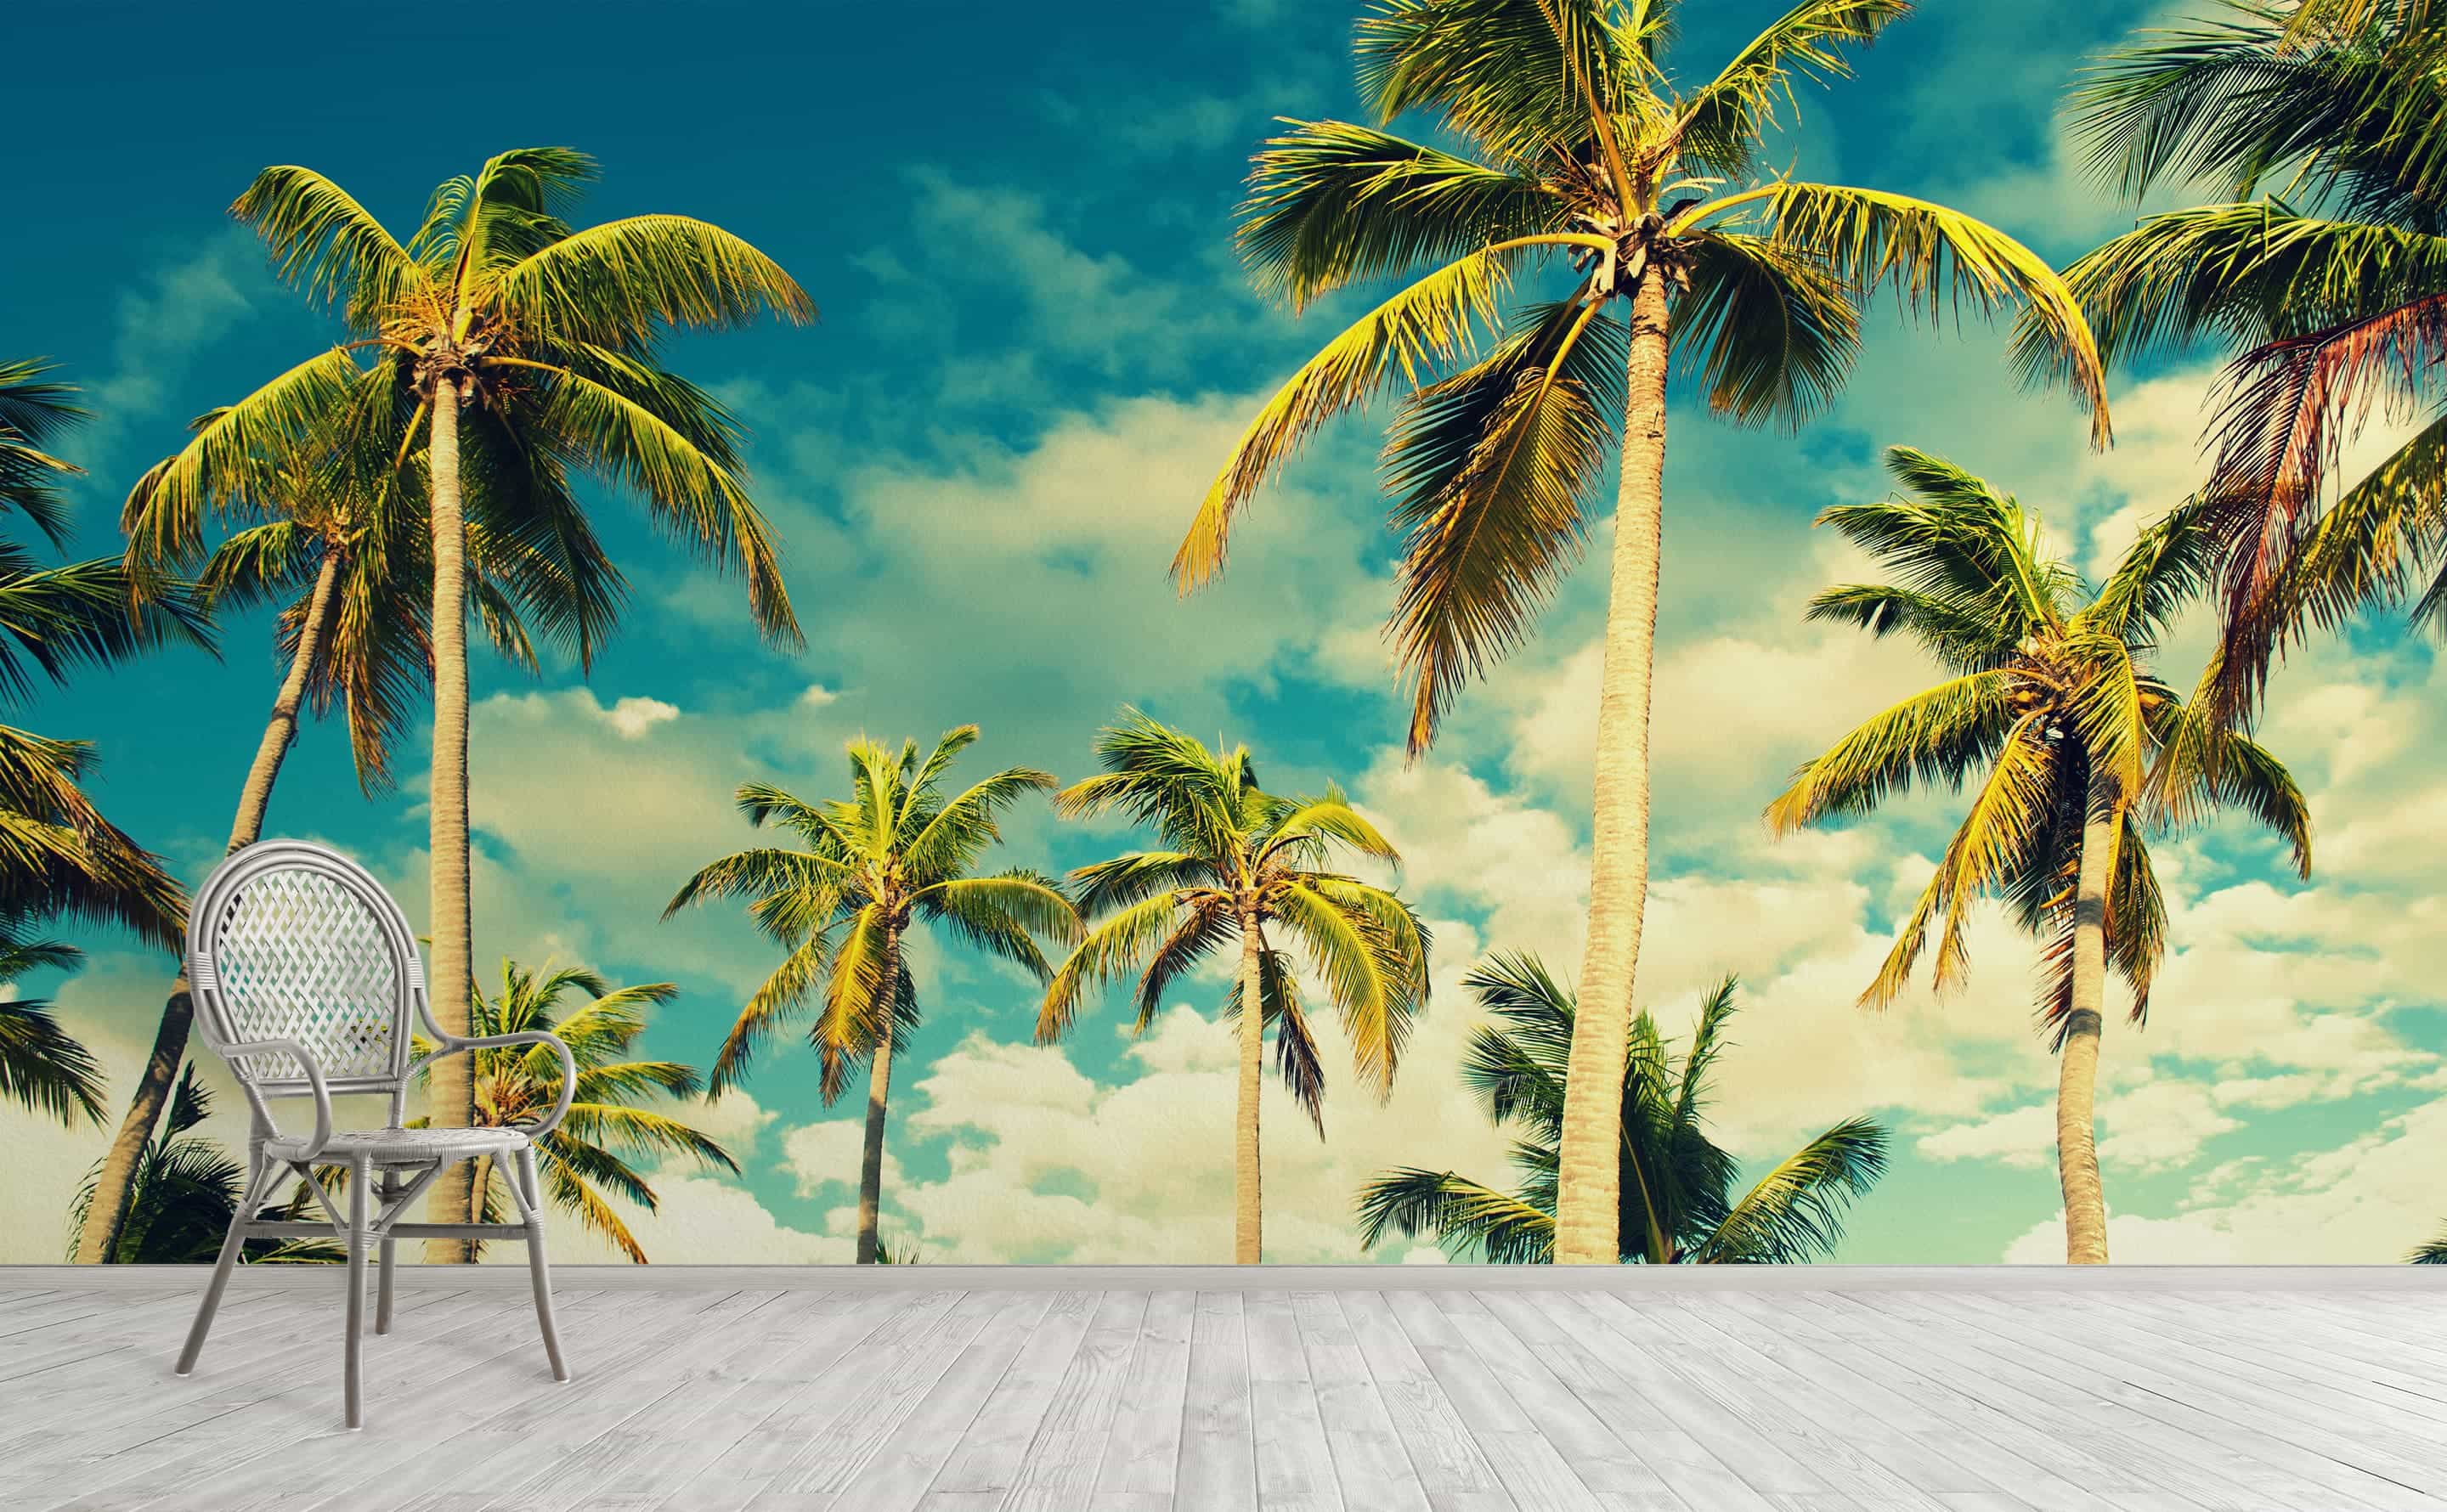 Hanging Palm Leaves - Pink – high-quality wall murals with free